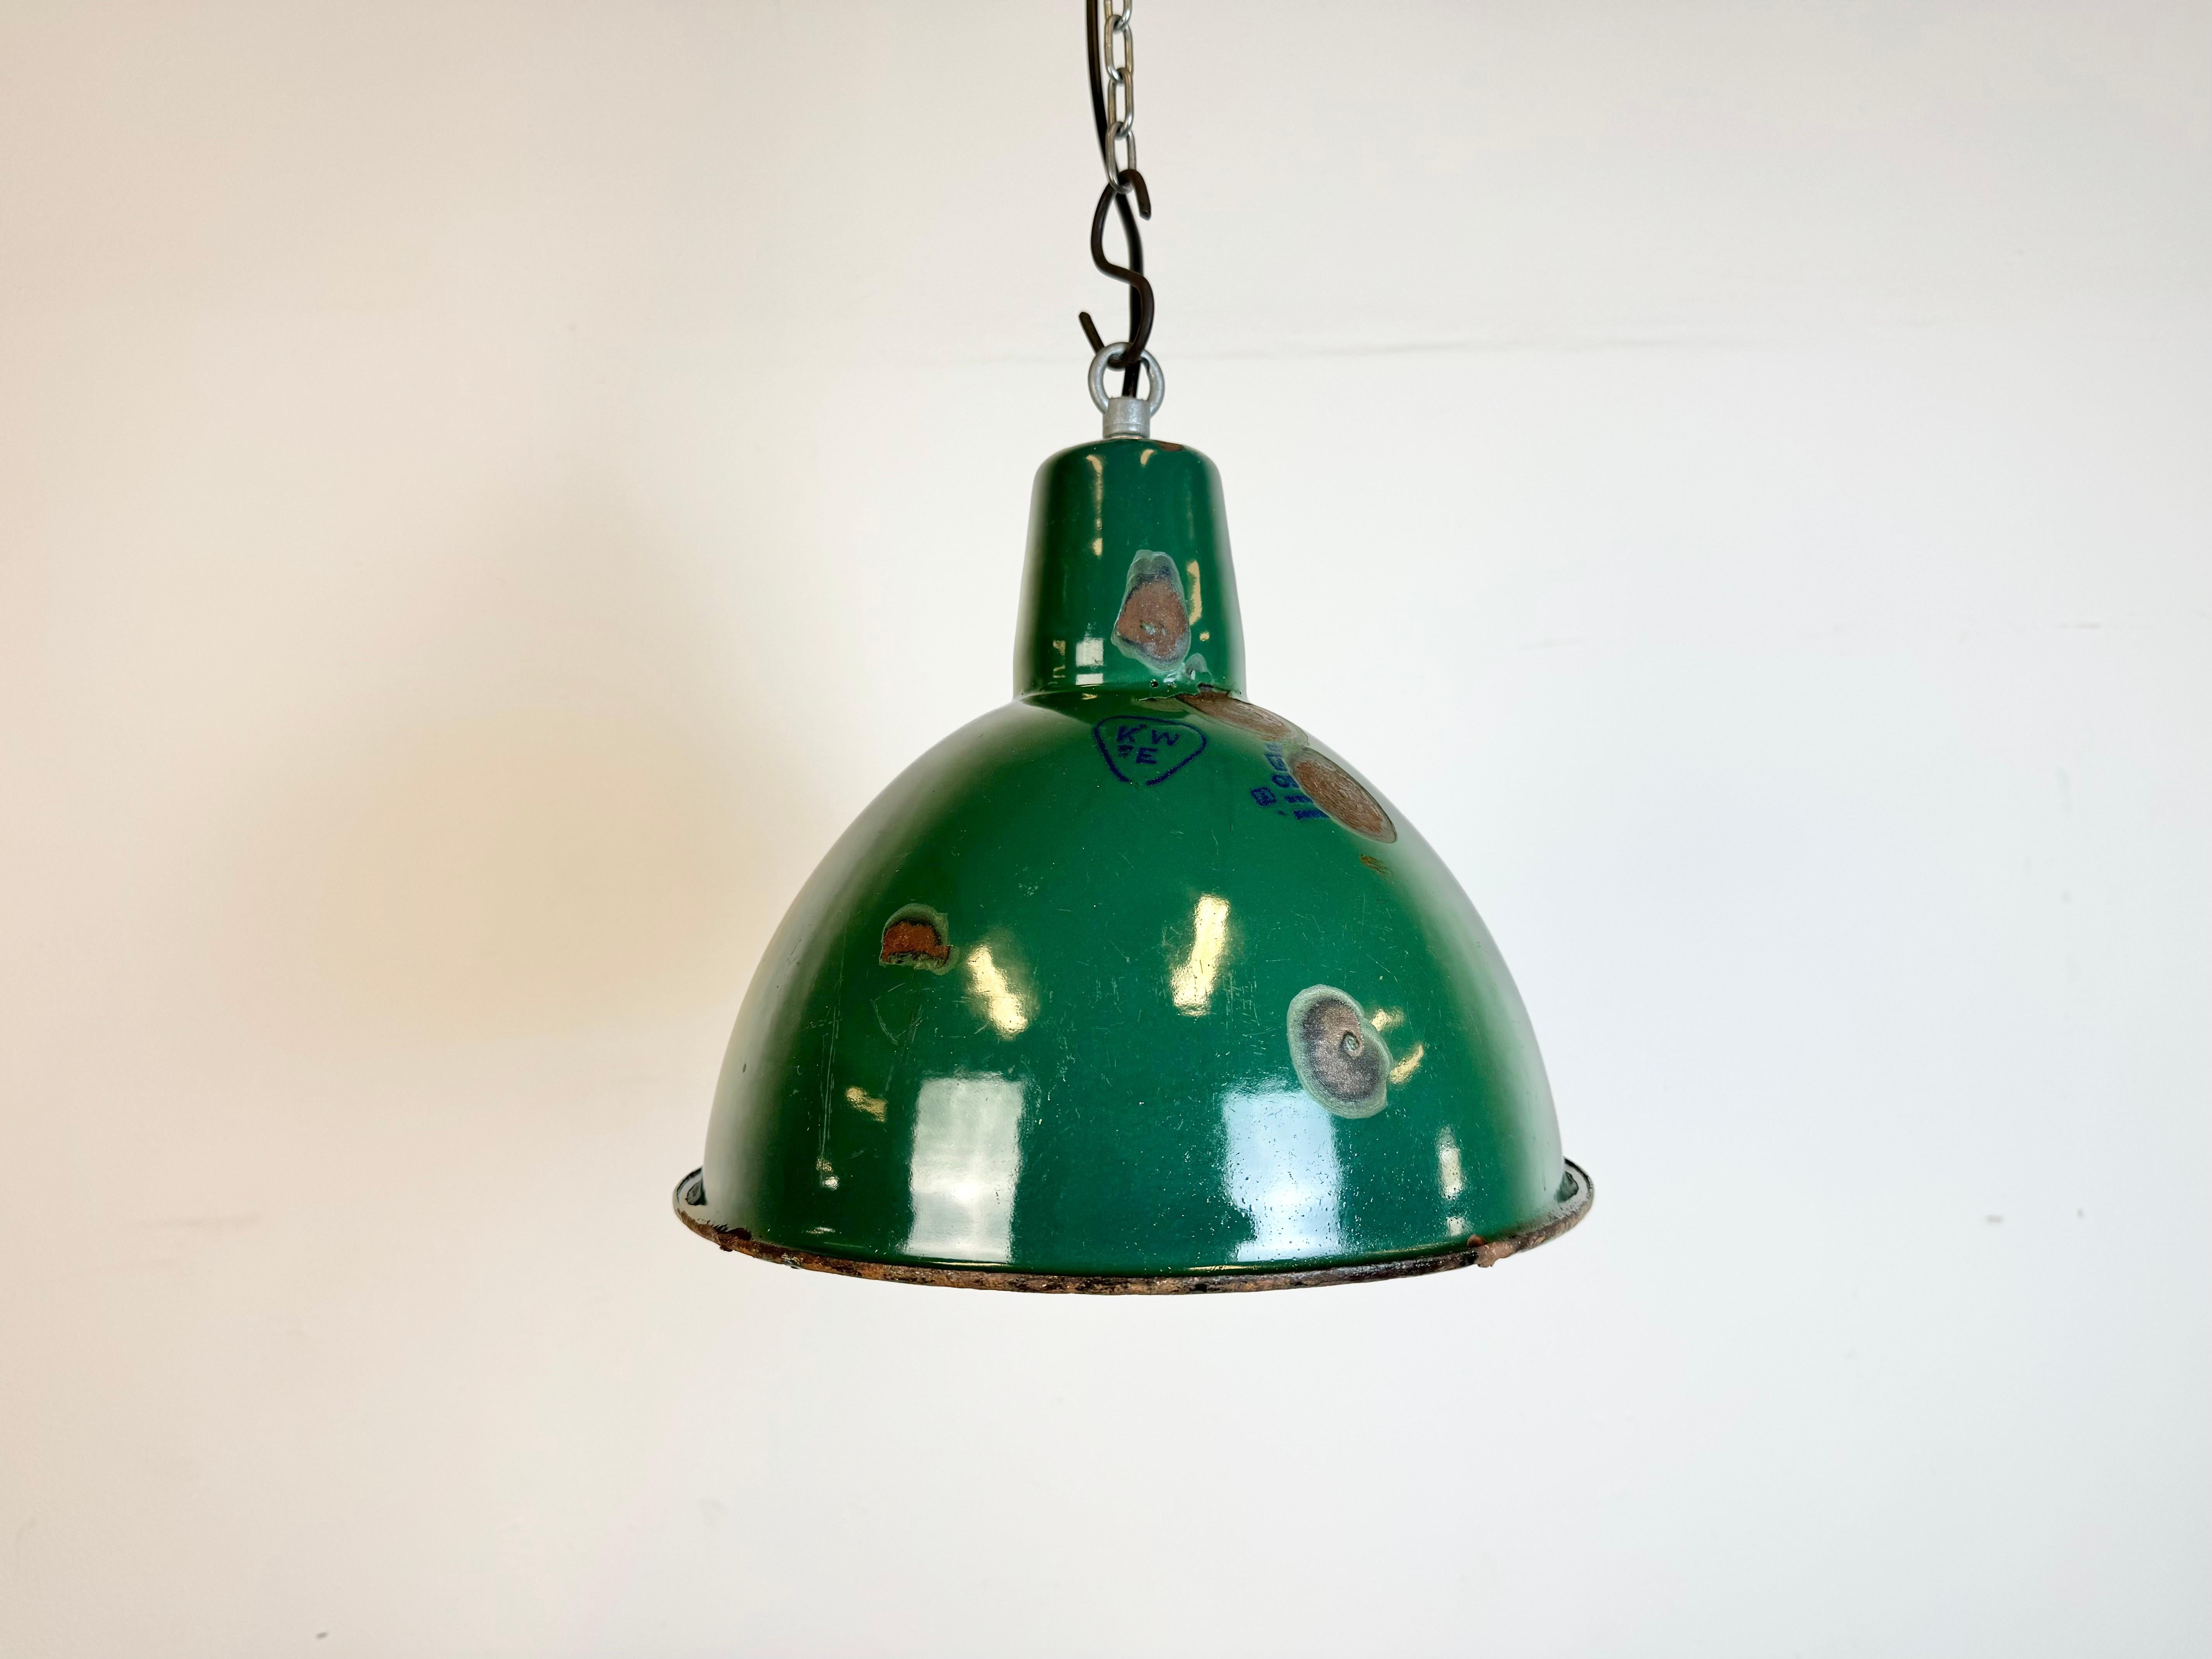 Industrial green enamel pendant light made by A23 factory in Wilkasy in Poland during the 1960s. White enamel inside the shade. Iron top. The porcelain socket requires standard E 27/ E26 light bulbs. New wire. Fully functional. The weight of the